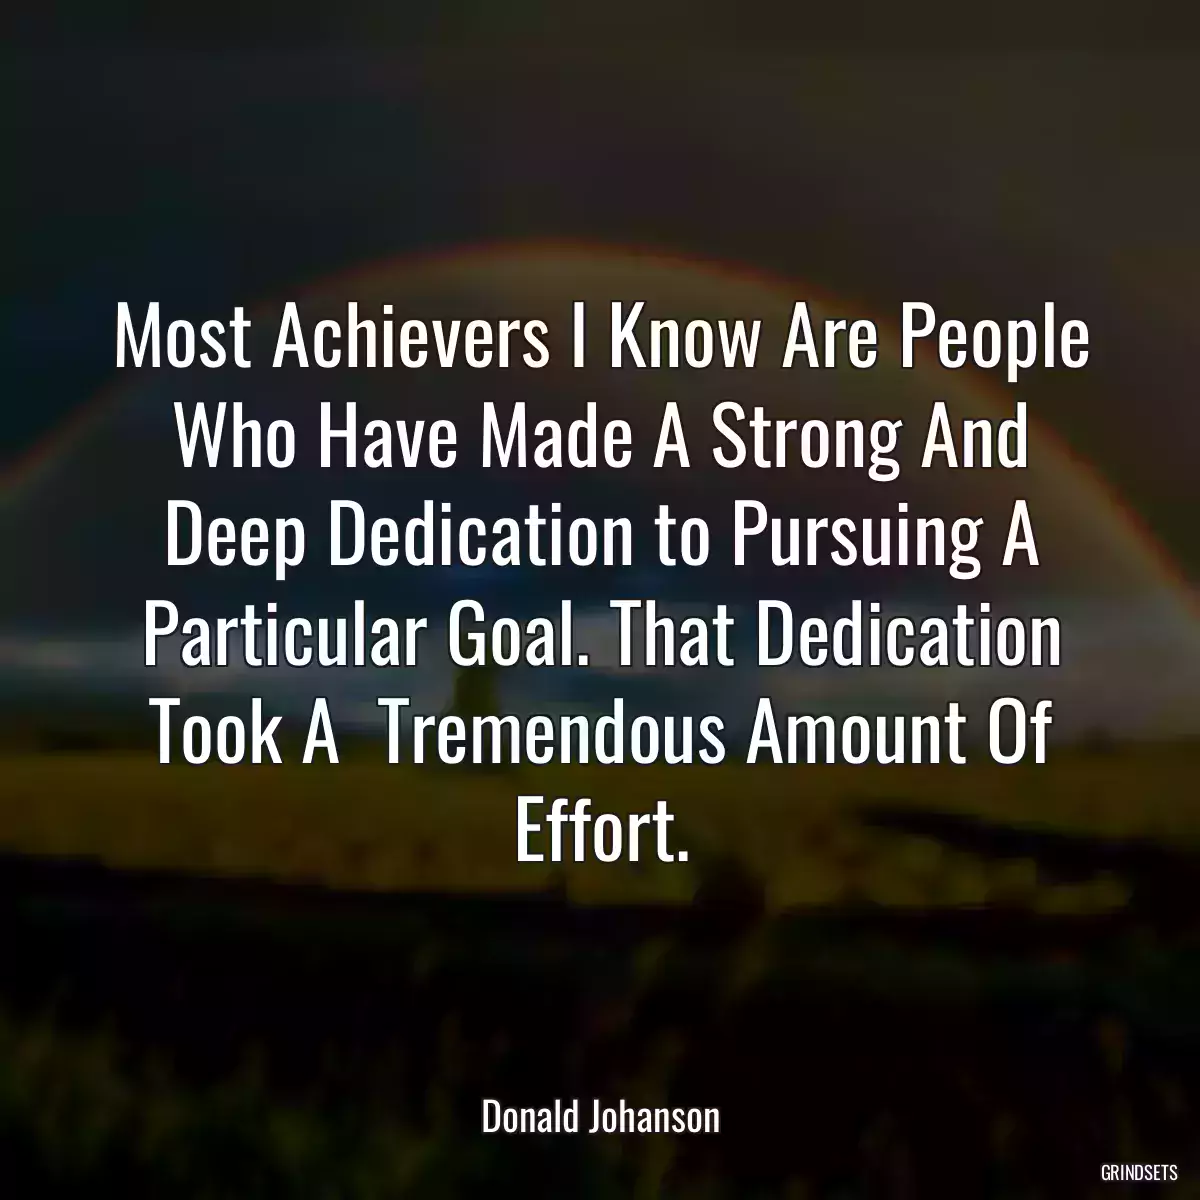 Most Achievers I Know Are People Who Have Made A Strong And Deep Dedication to Pursuing A Particular Goal. That Dedication Took A  Tremendous Amount Of Effort.